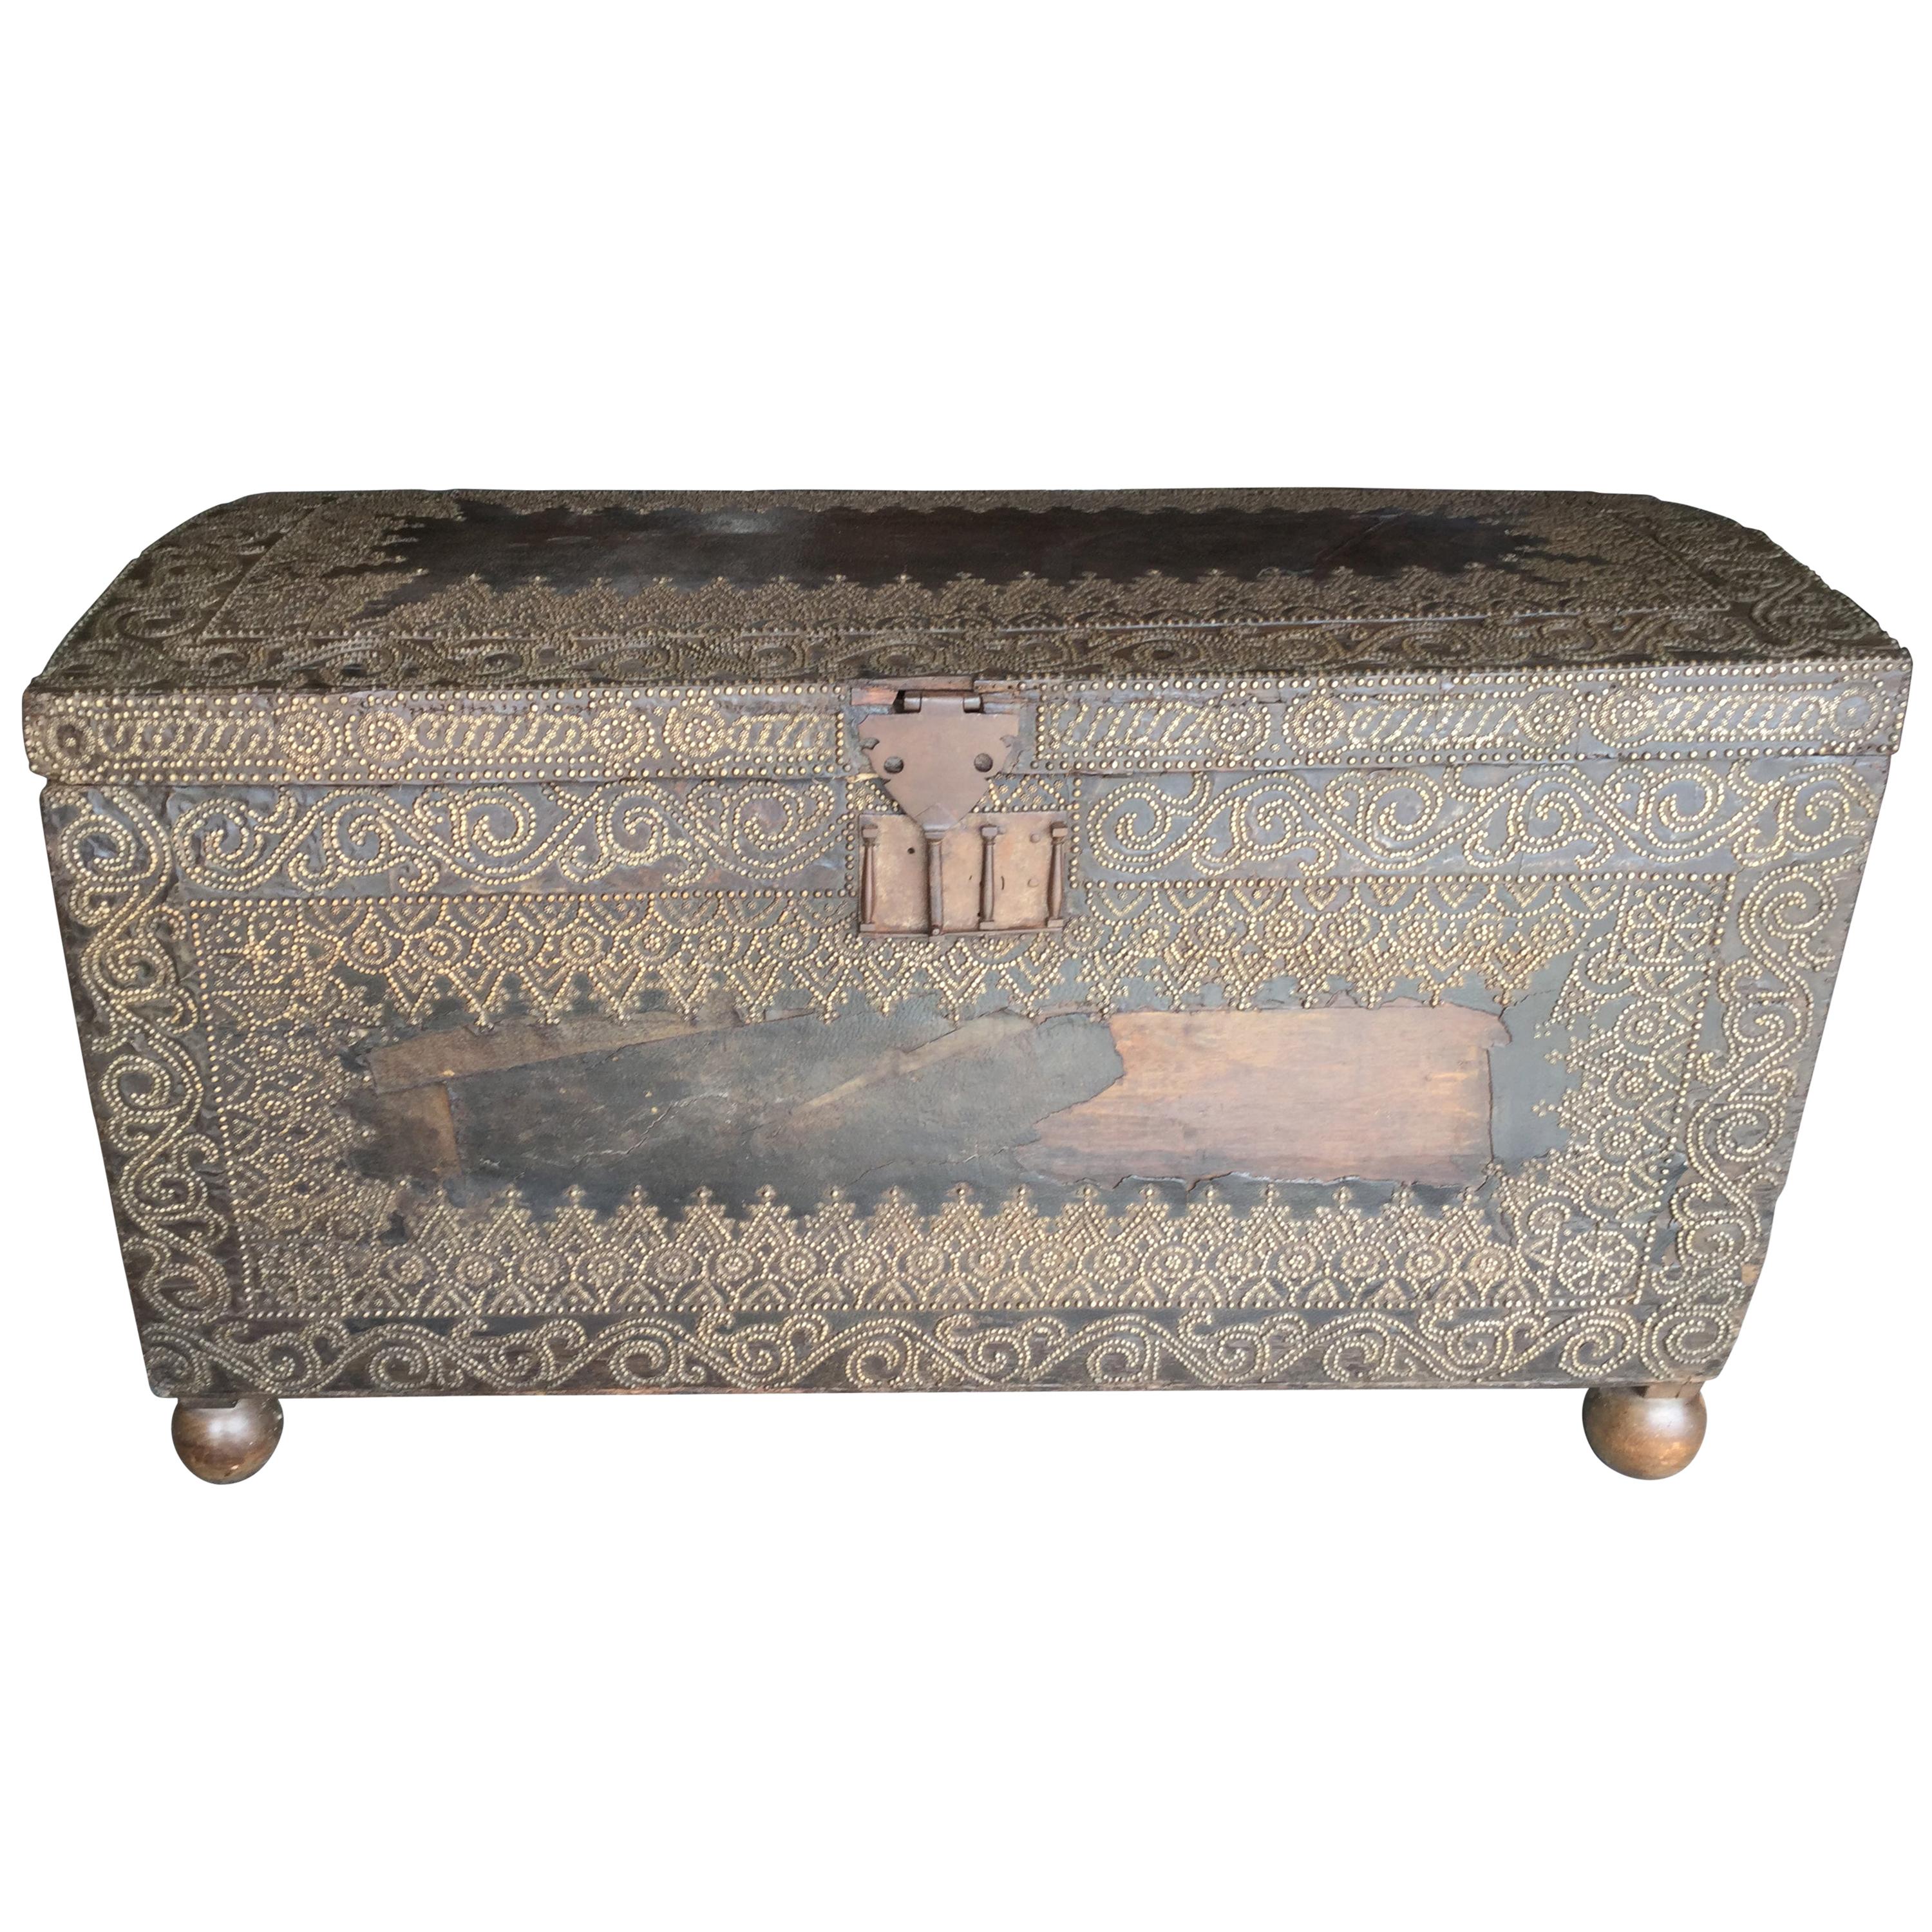 Large 18th Century Spanish Wooden, Leather & Brass Trunk